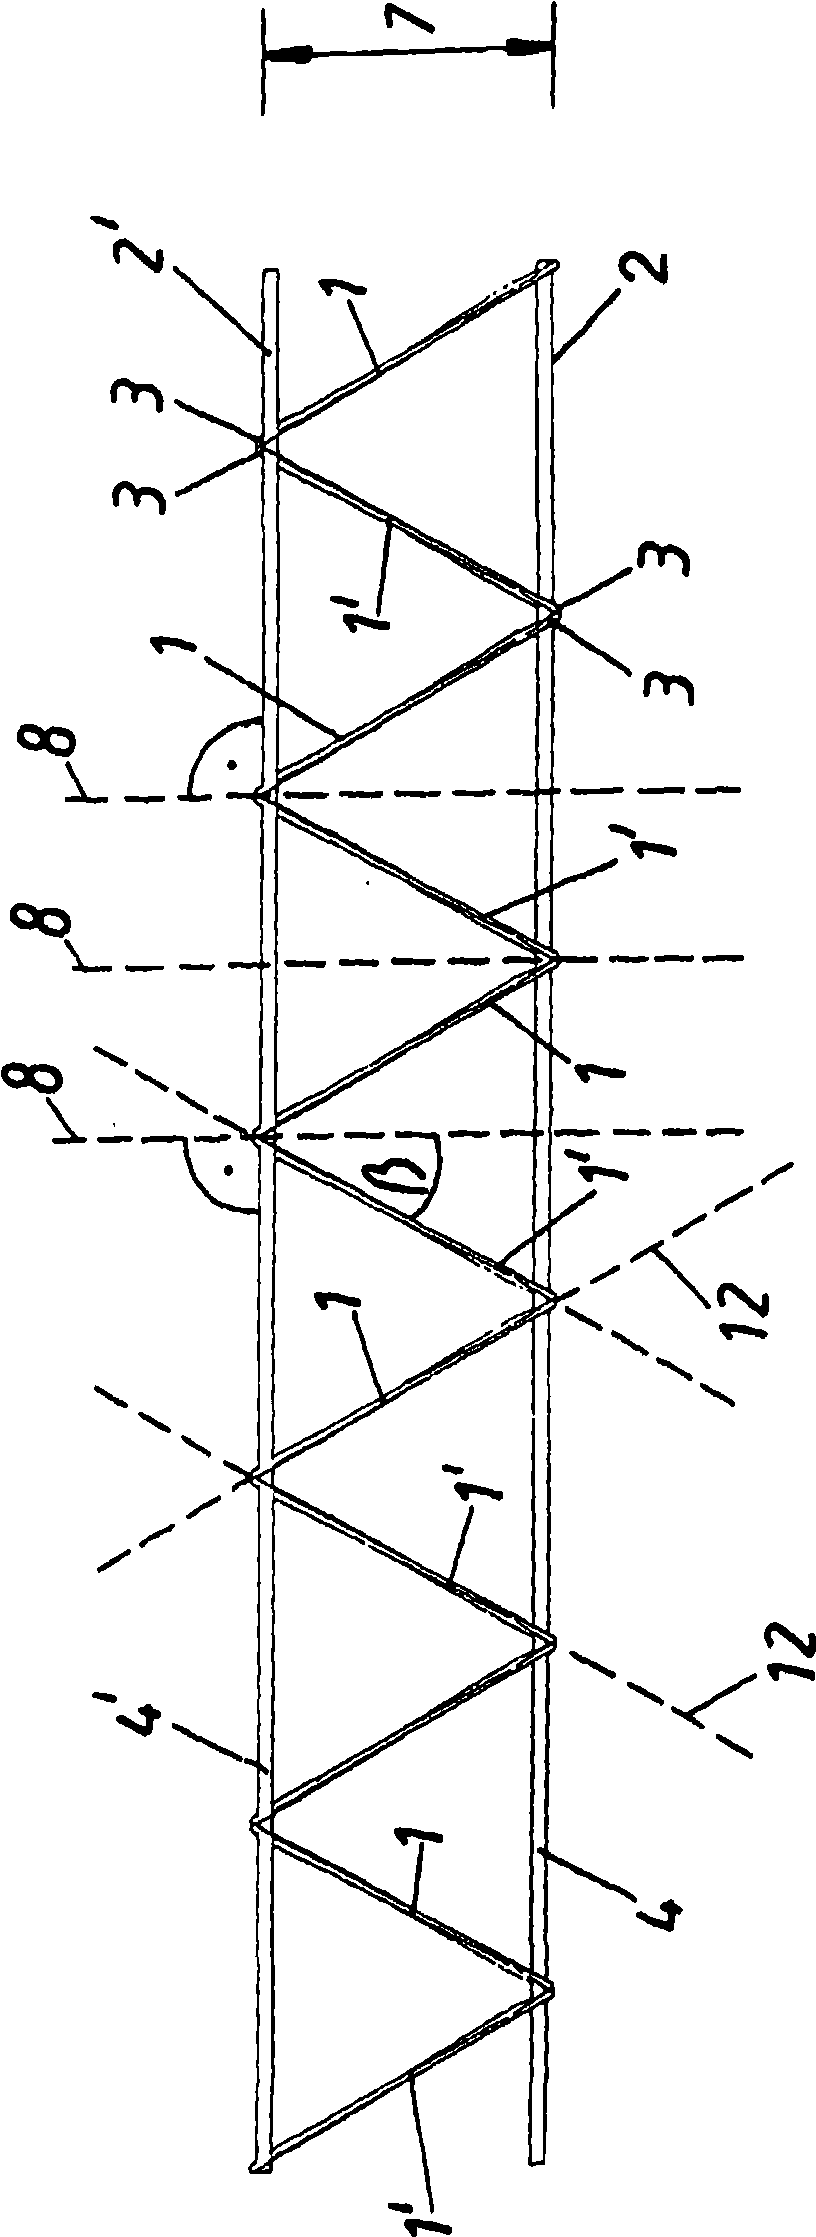 Grid structure